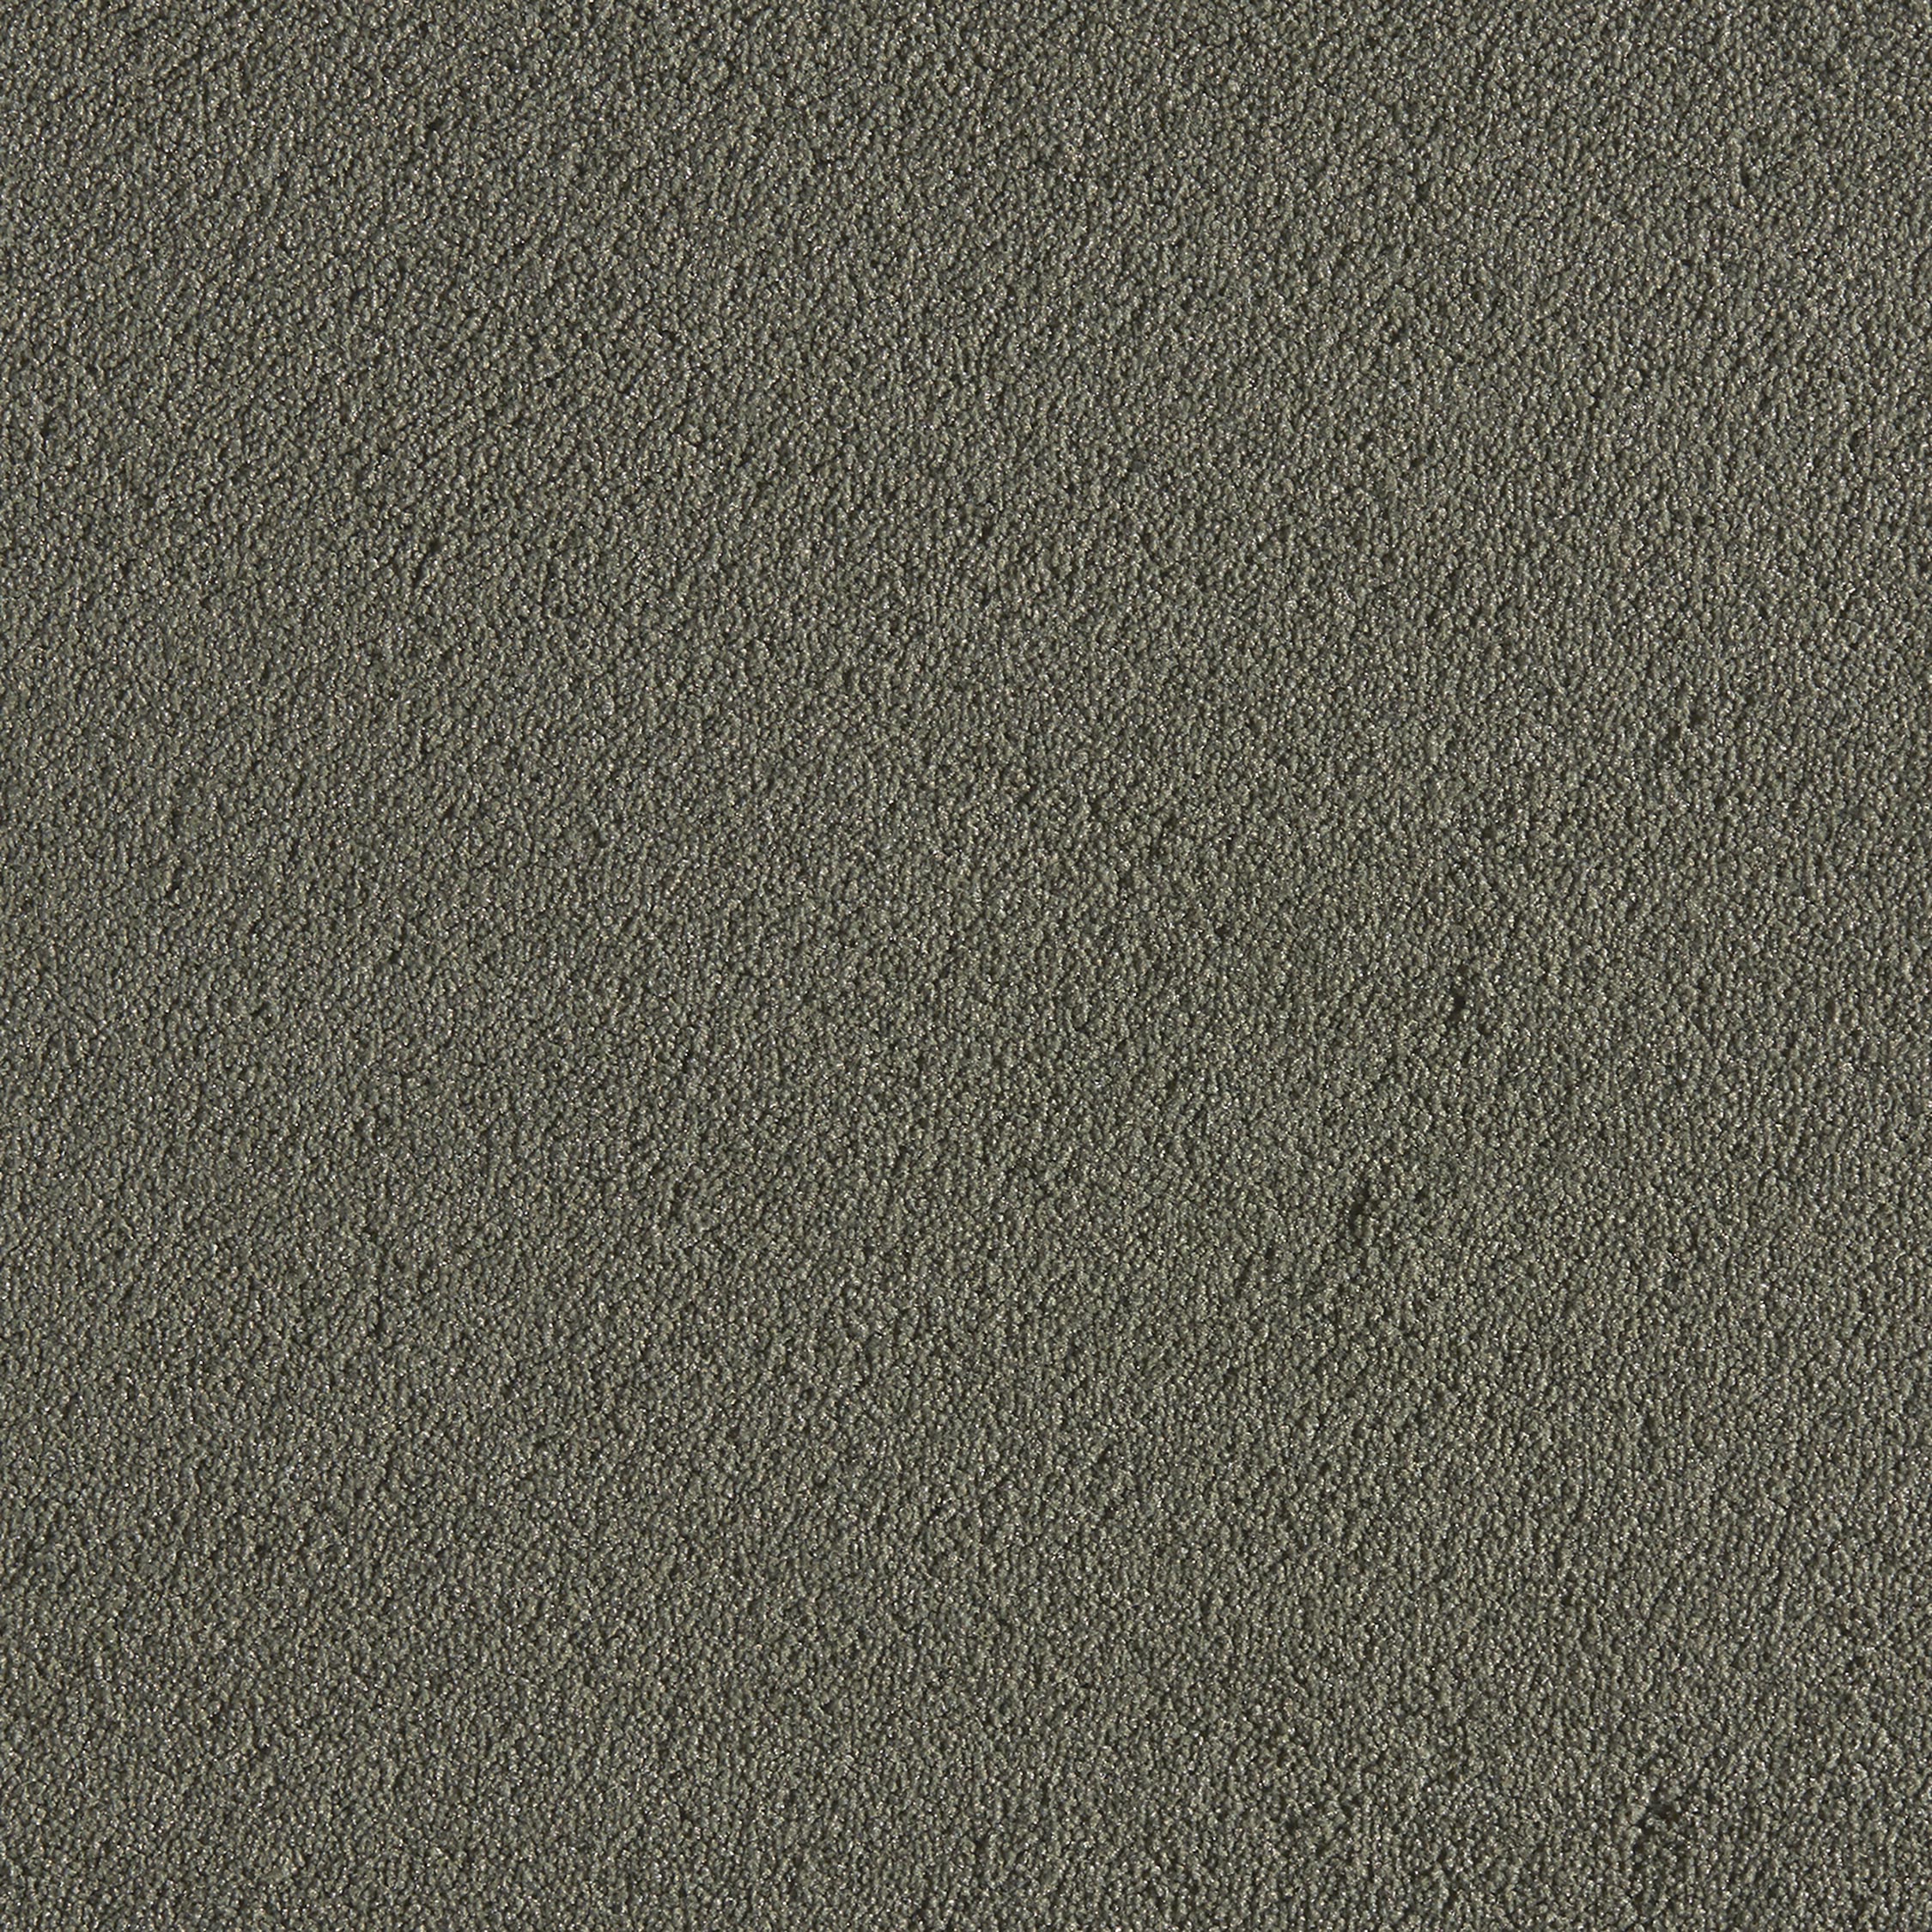 Texture 2000 forest green